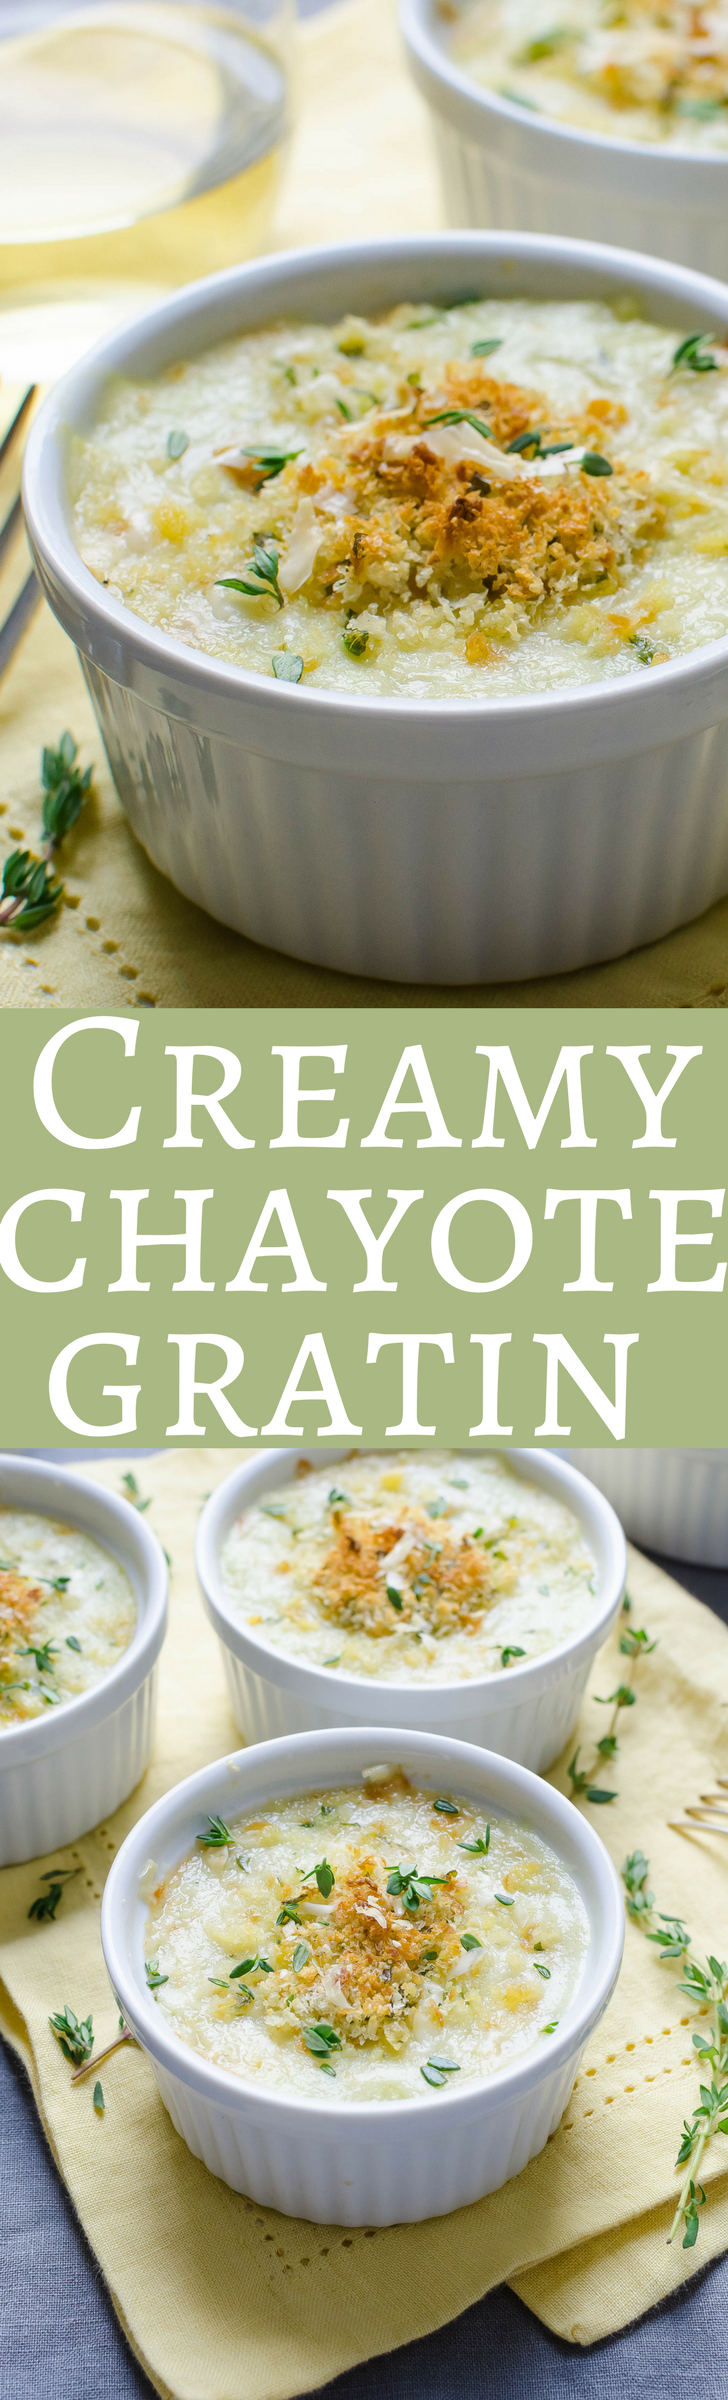 Want to know how to cook chayote squash? It's easy and delicious with this recipe for Creamy Chayote Gratin!